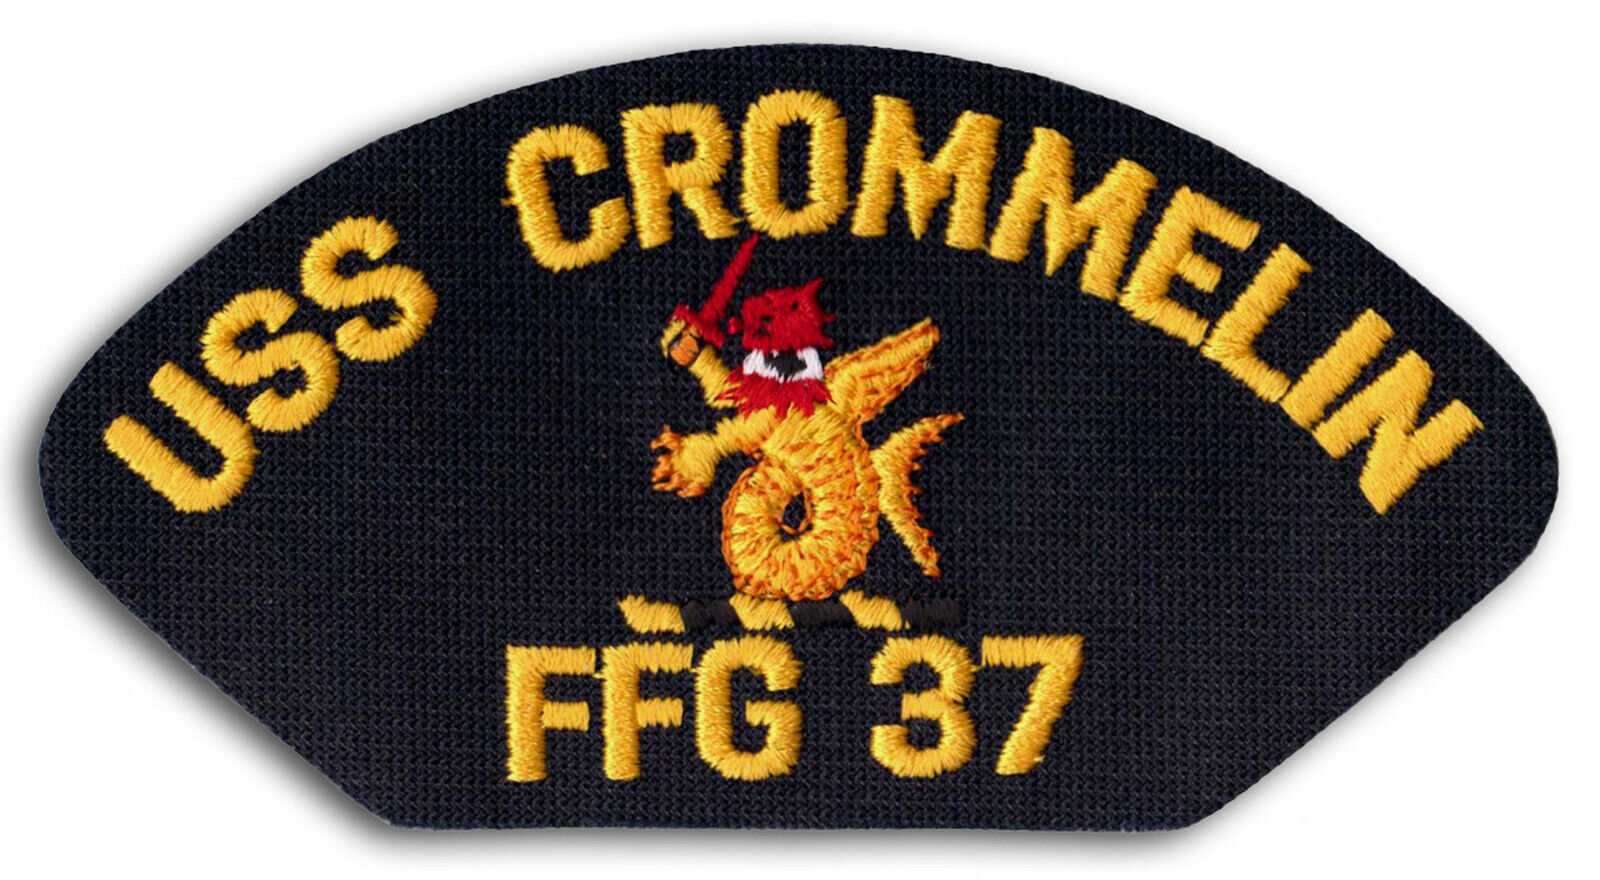 US Navy FFG-37 USS Crommelin Guided Missile Frigate Cap Patch Iron-On